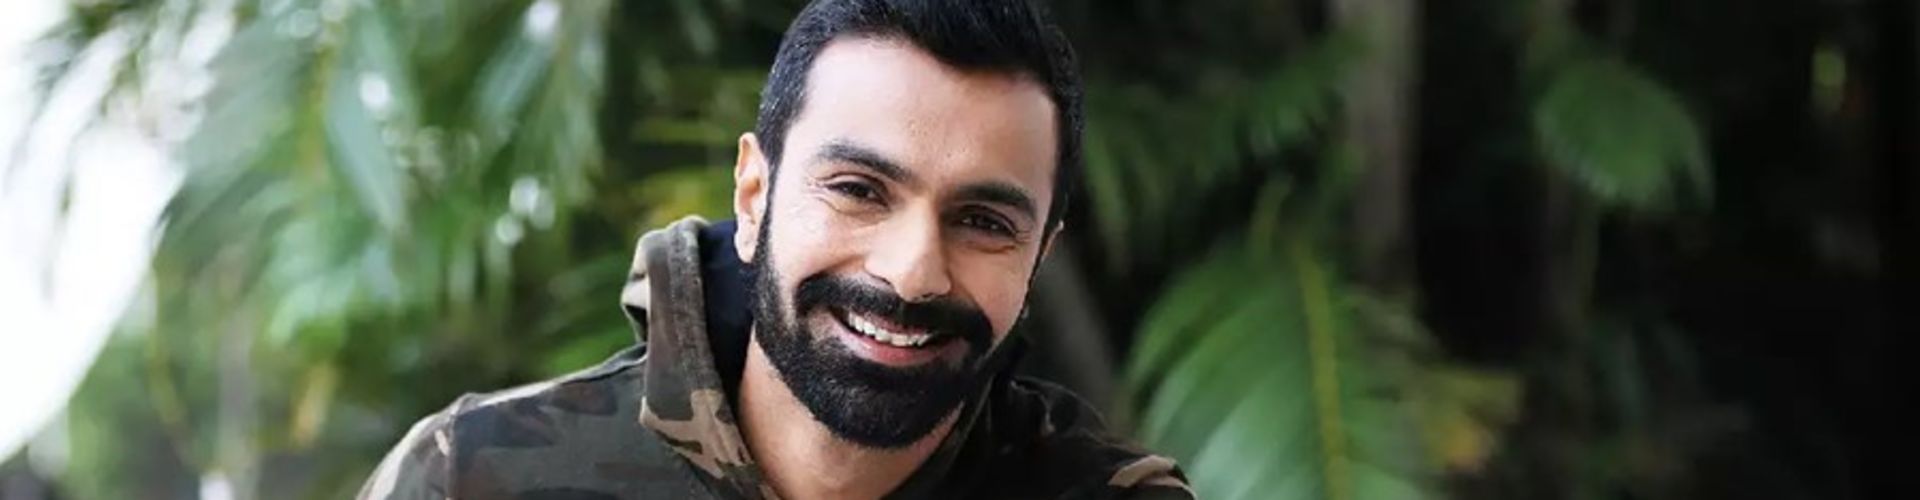 We’re Lacking Clean Content These Days Says Ashmit Patel